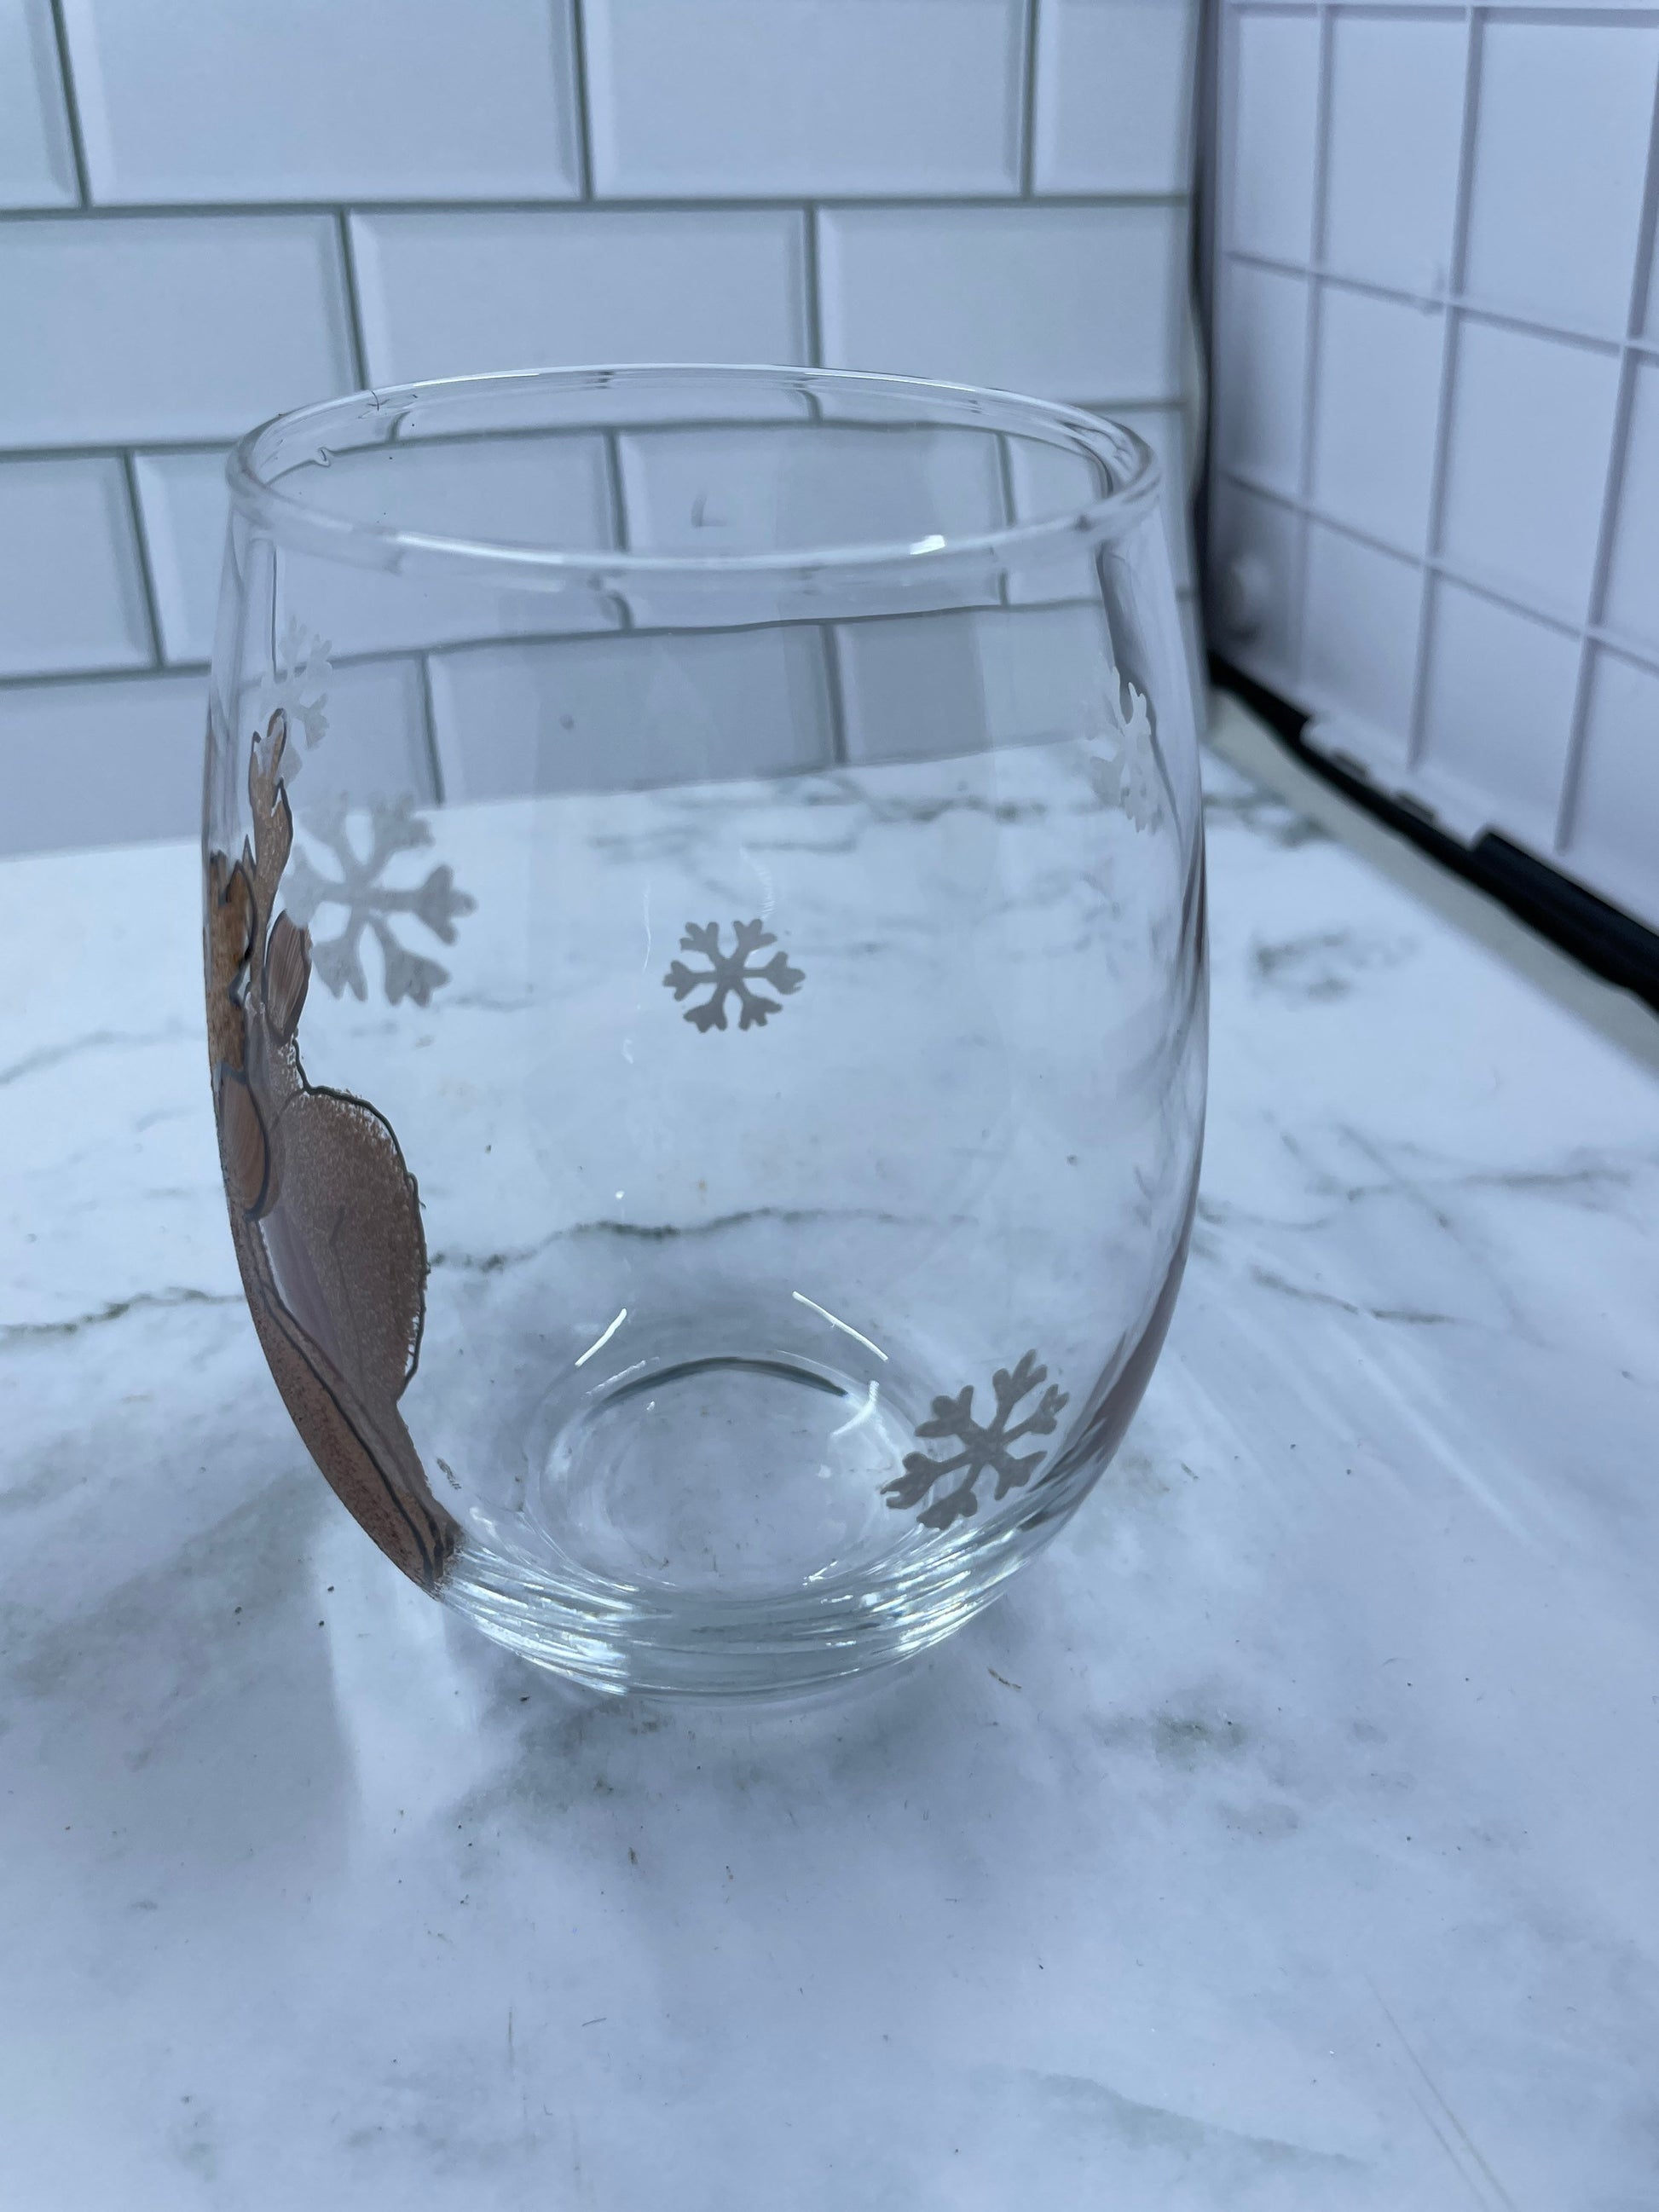 Hand Painted Reindeer stemless wine glass tumbler 15 oz